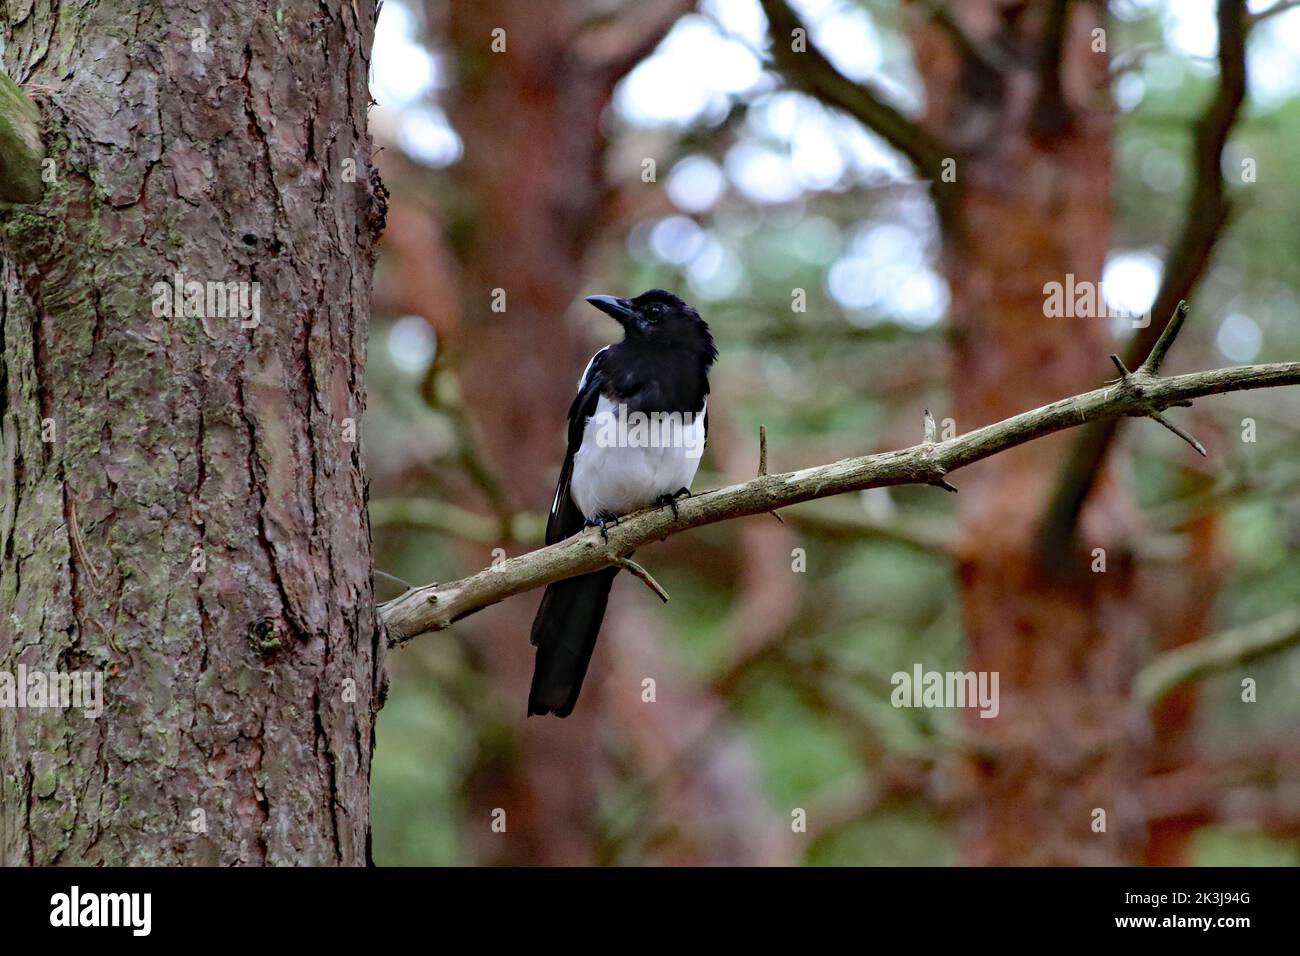 A closeup shot of a black white magpie bird perched on a branch in the Formby Woods, Merseyside Stock Photo